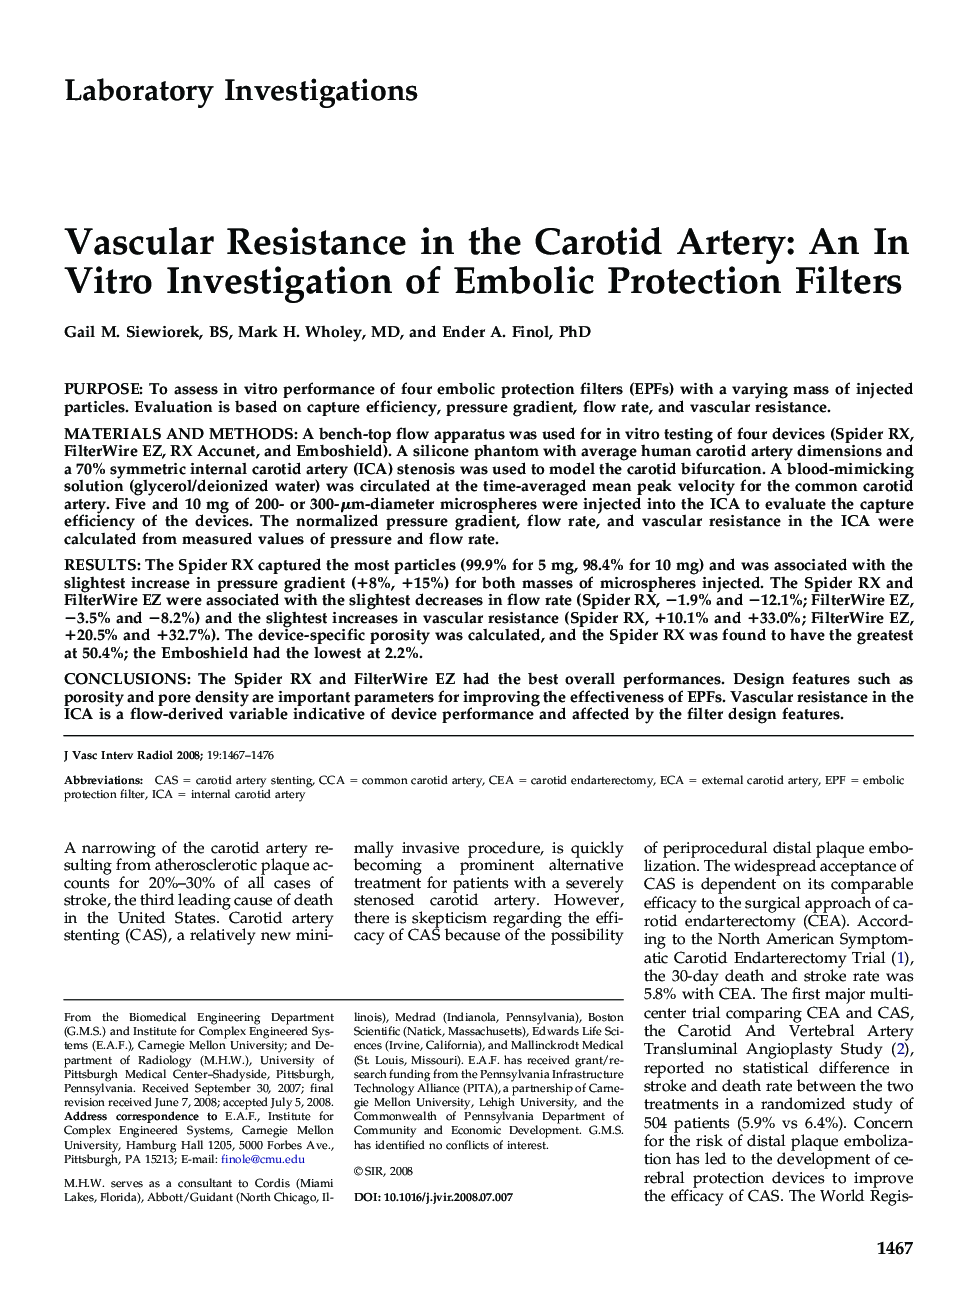 Vascular Resistance in the Carotid Artery: An In Vitro Investigation of Embolic Protection Filters